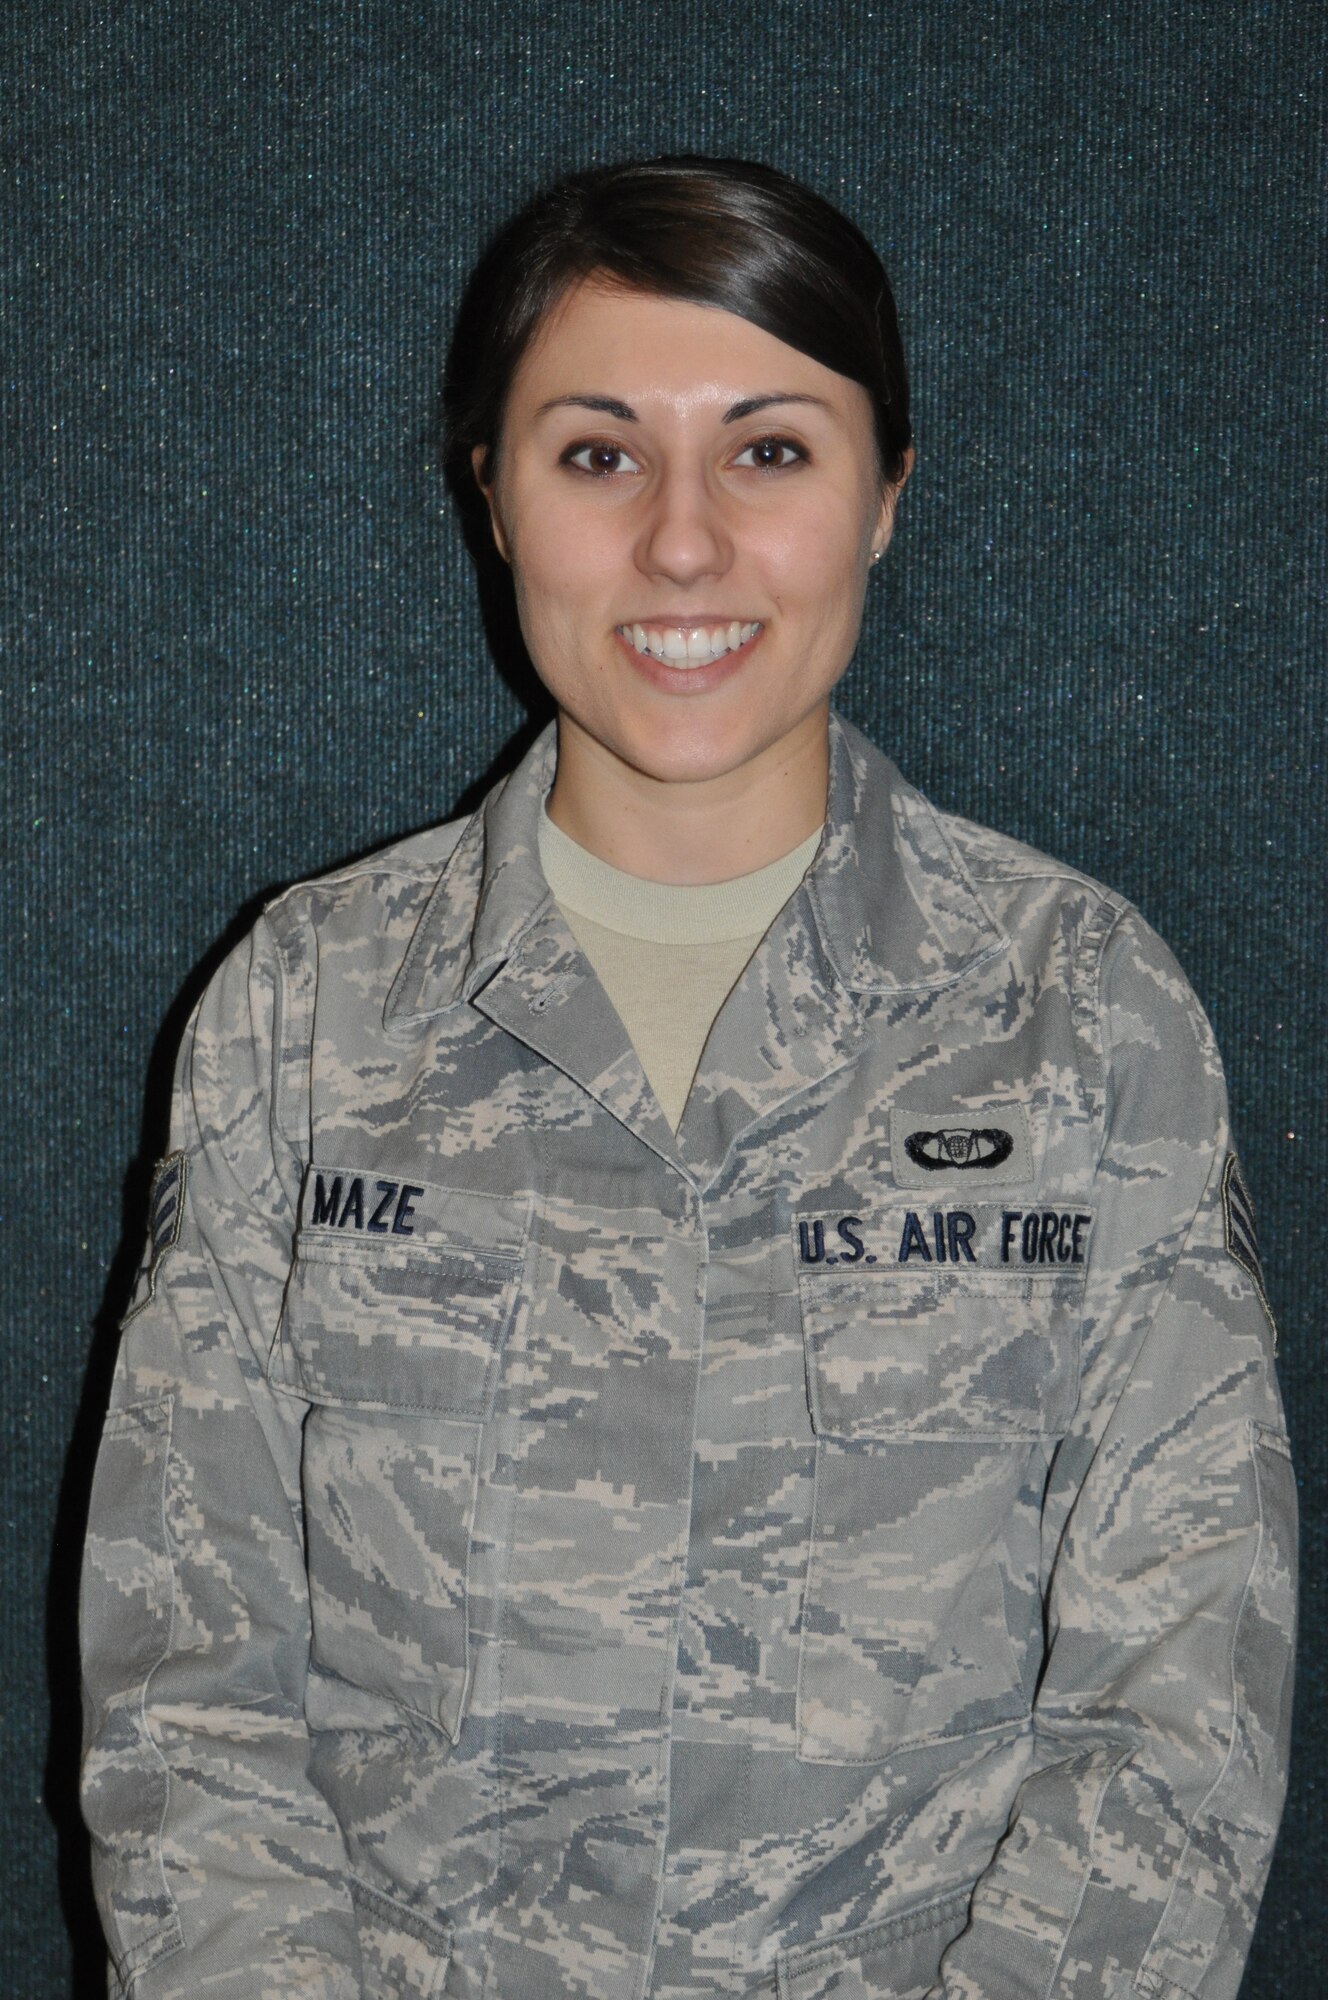 “My job in the Blue Flag exercise is to setup websites...allowing everyone has access to pertinent information to effectively communicate with the entire staff,” said Senior Airman Holly Maze, 612th Air and Space Operations Center Combat Cell Reports. “I’m also responsible for monitoring chat rooms and keeping logs of important events to be included in a daily situation report.” (U.S. Air Force photo by Master Sgt. Kelly Ogden/Released).